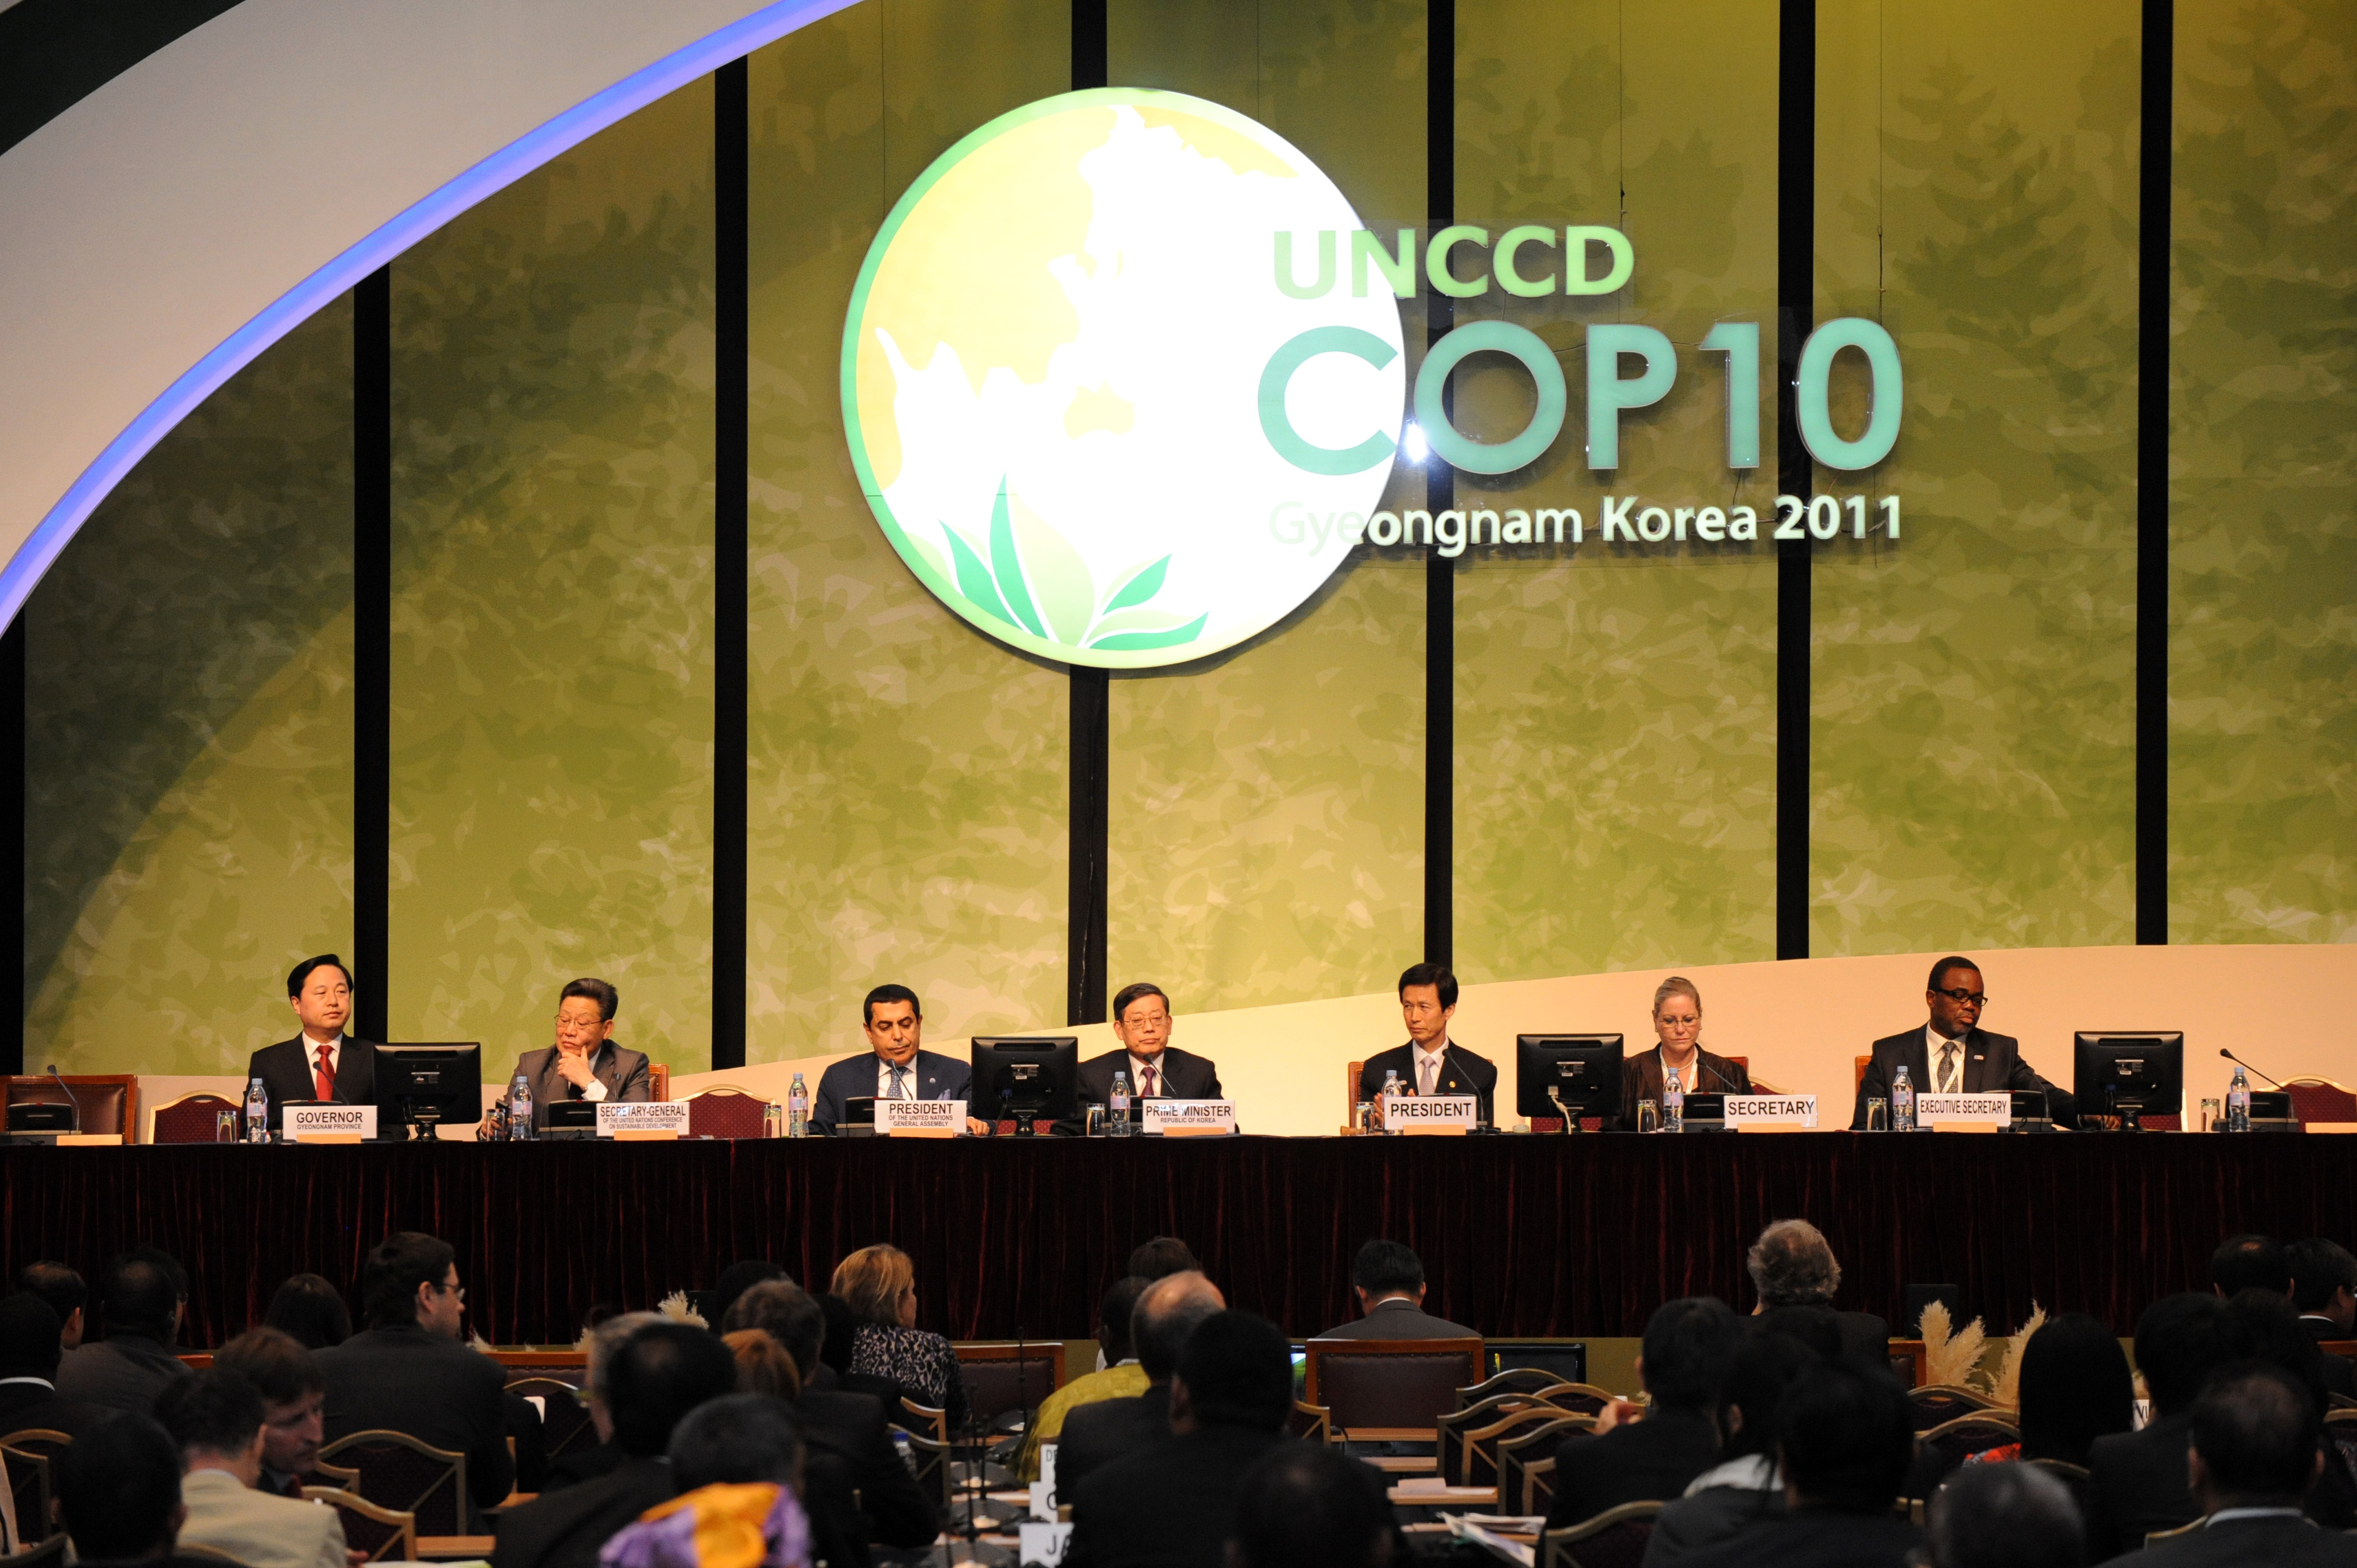 KFS successfully hosted the UNCCD COP10 이미지1